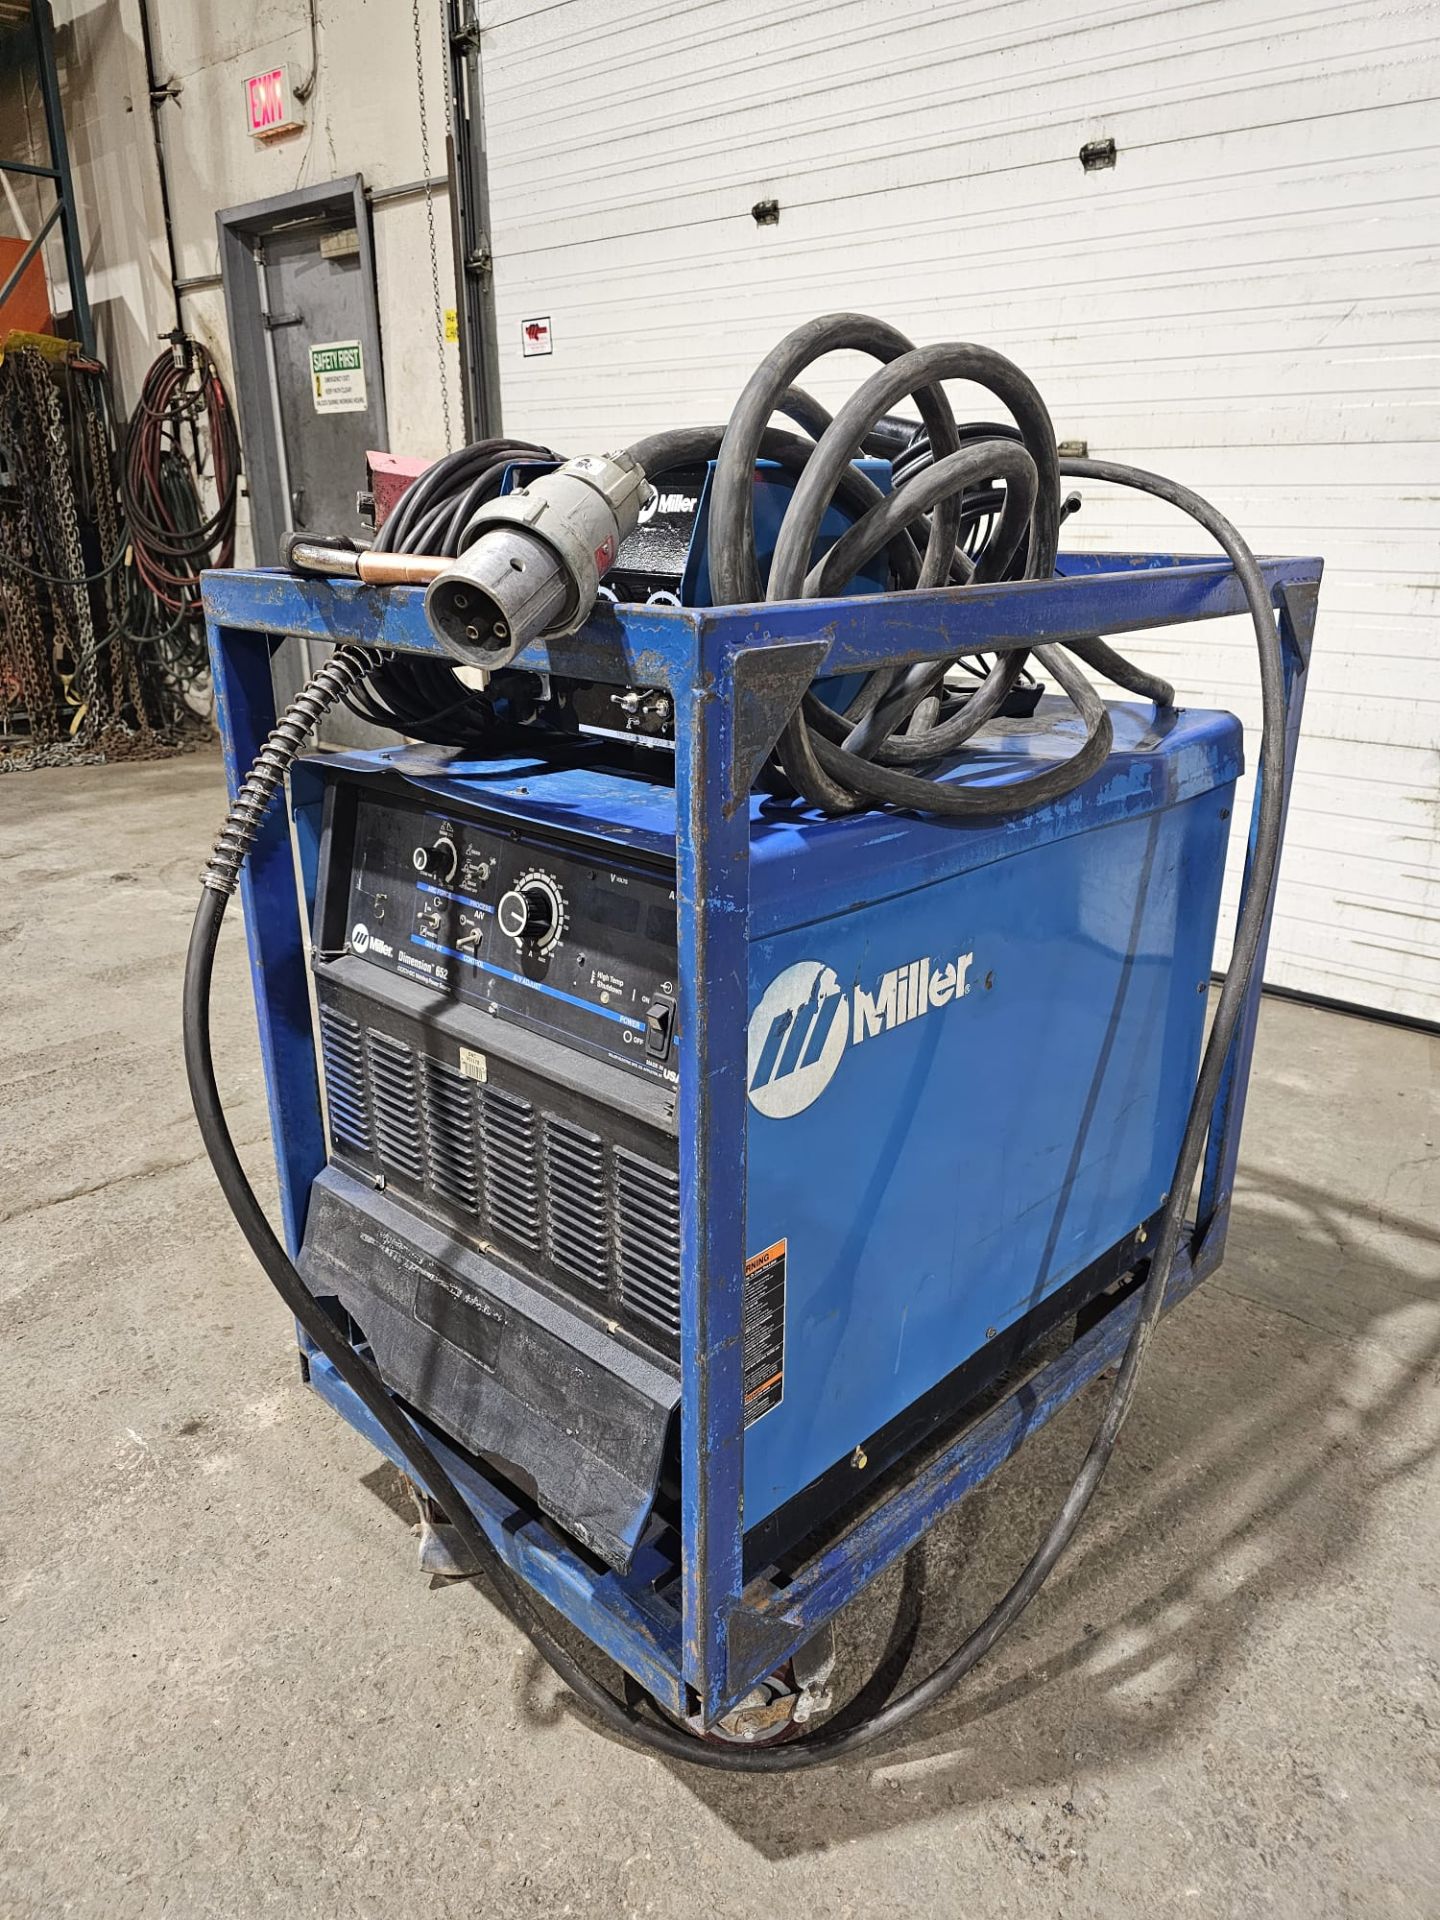 Miller Dimension 652 Mig Welder 650 Amp Mig Tig Stick Multi Process Power Source with 22A Wire - Image 2 of 10